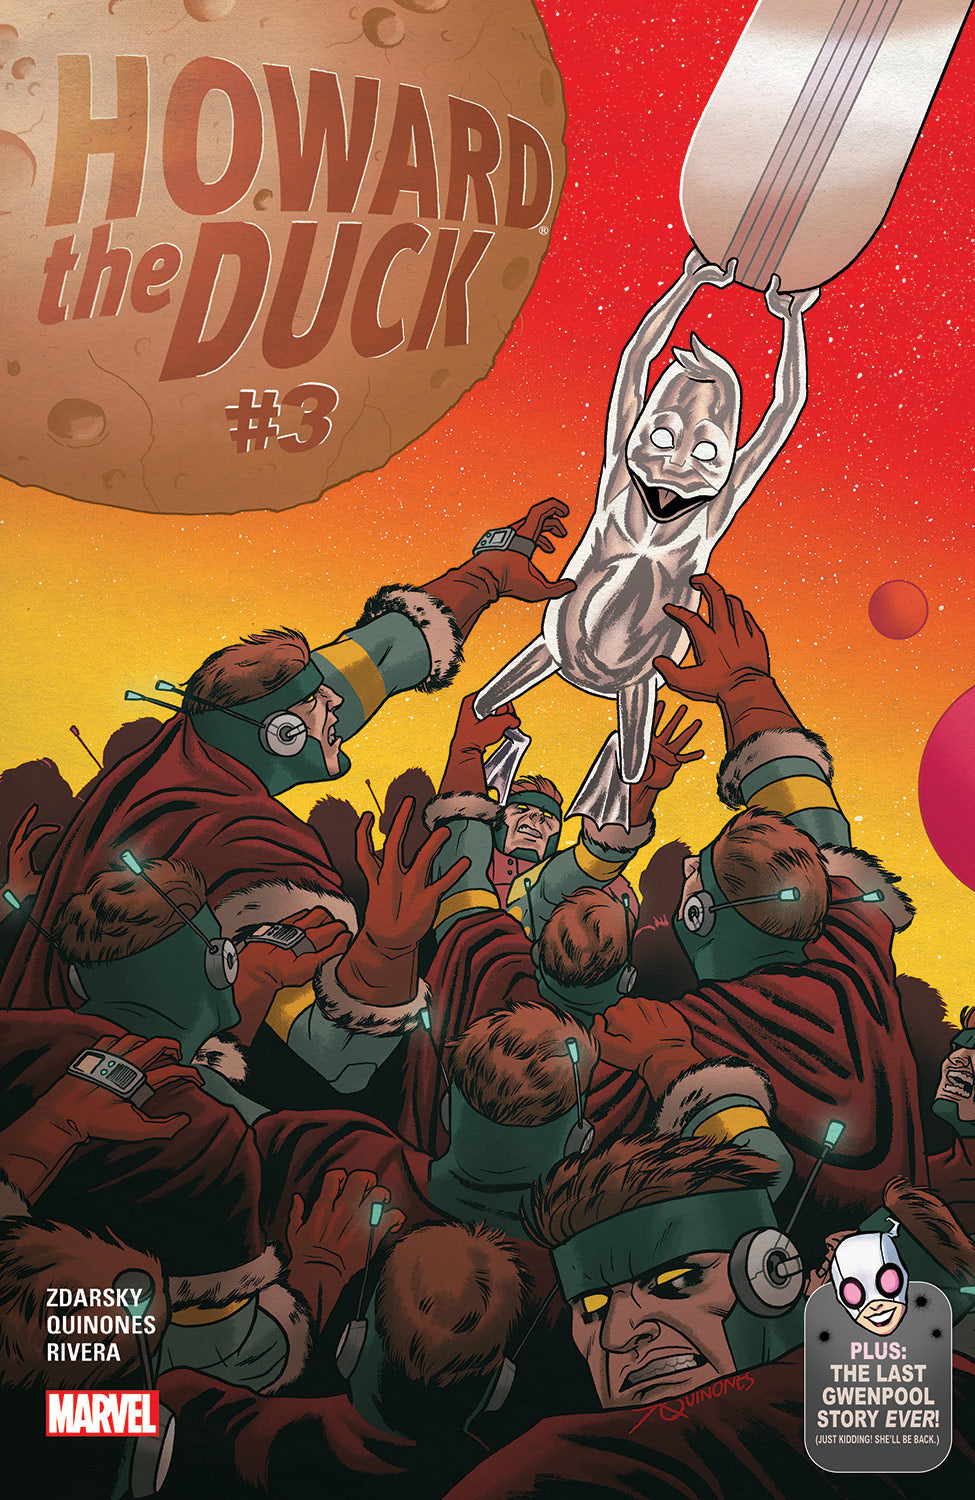 Howard the Duck Vol.6 #3 (2016) - Boxcat Games & Collectibles